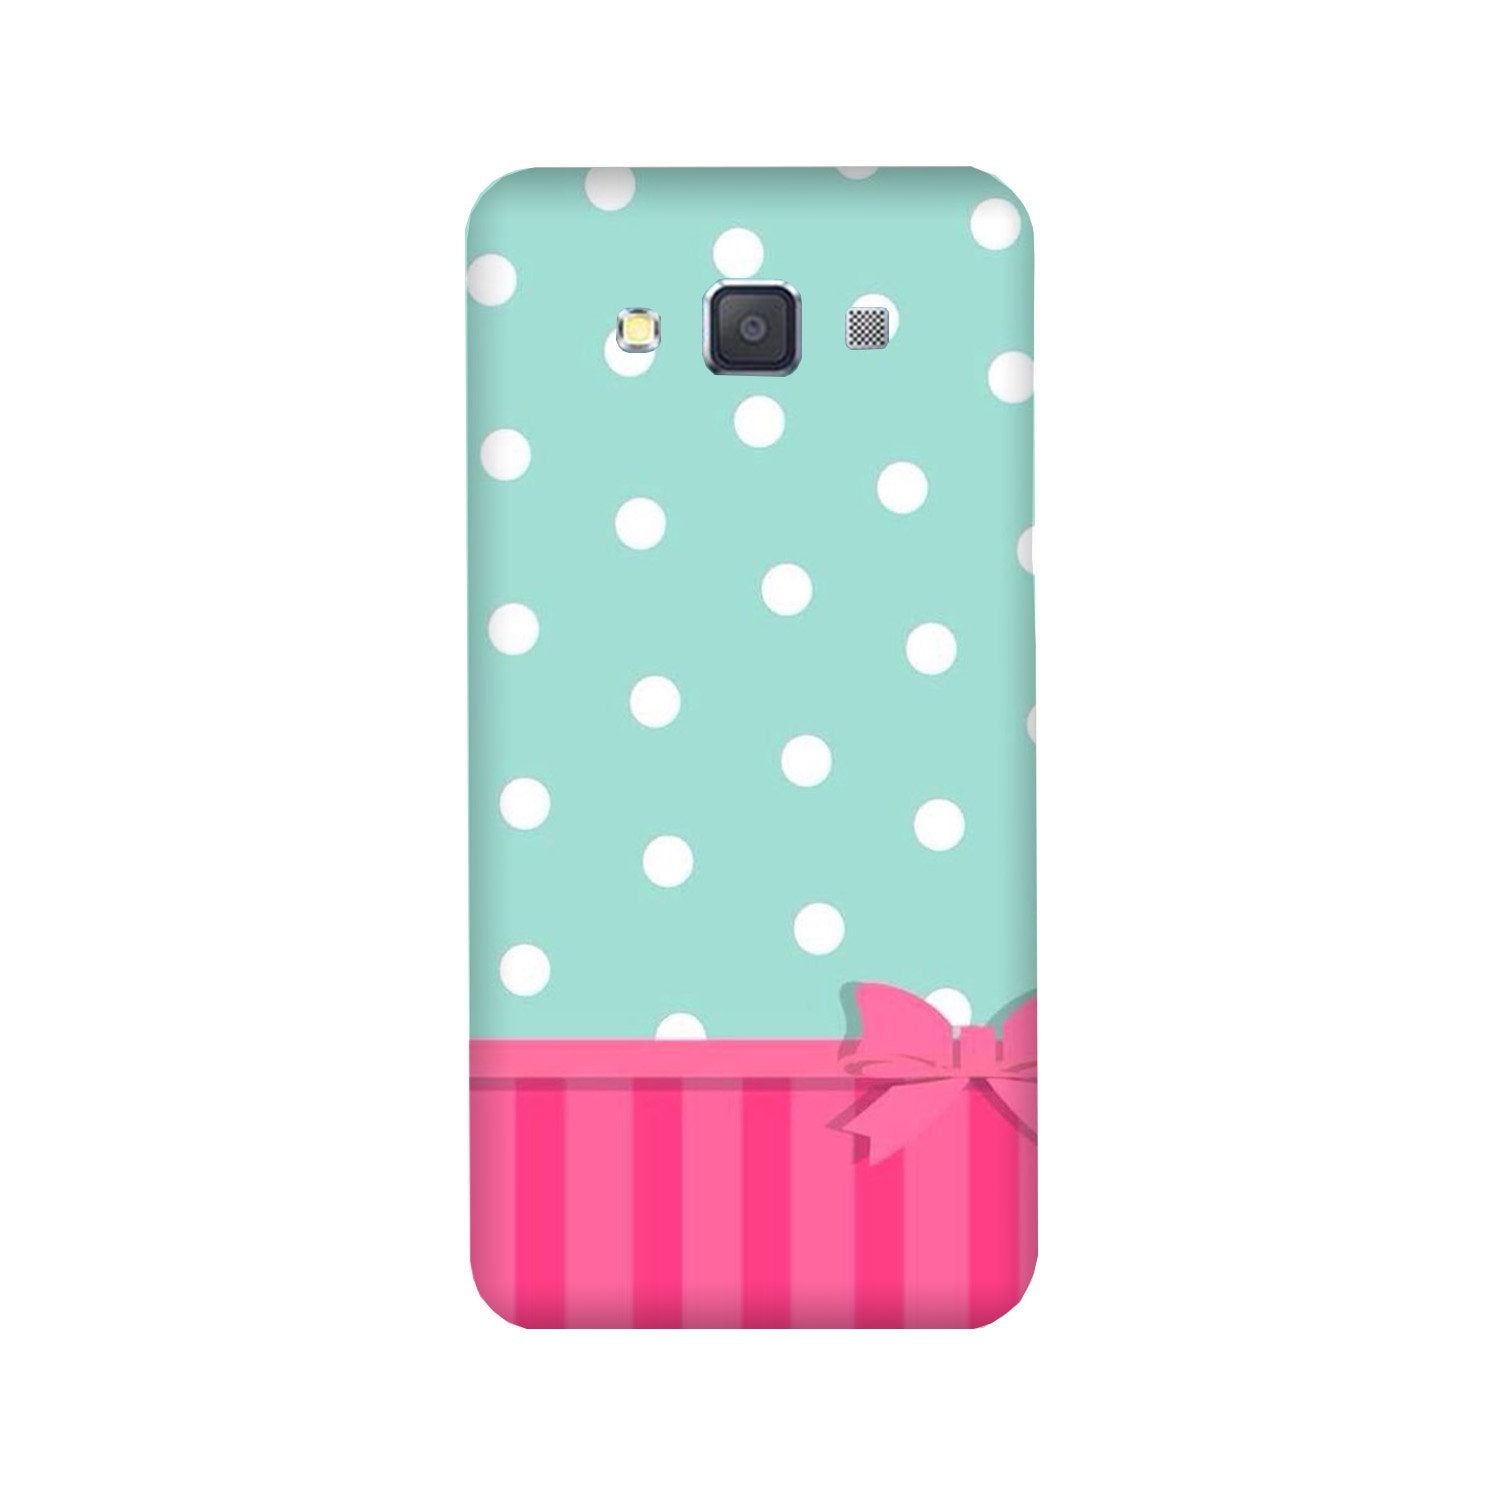 Gift Wrap Case for Galaxy A5 (2015)